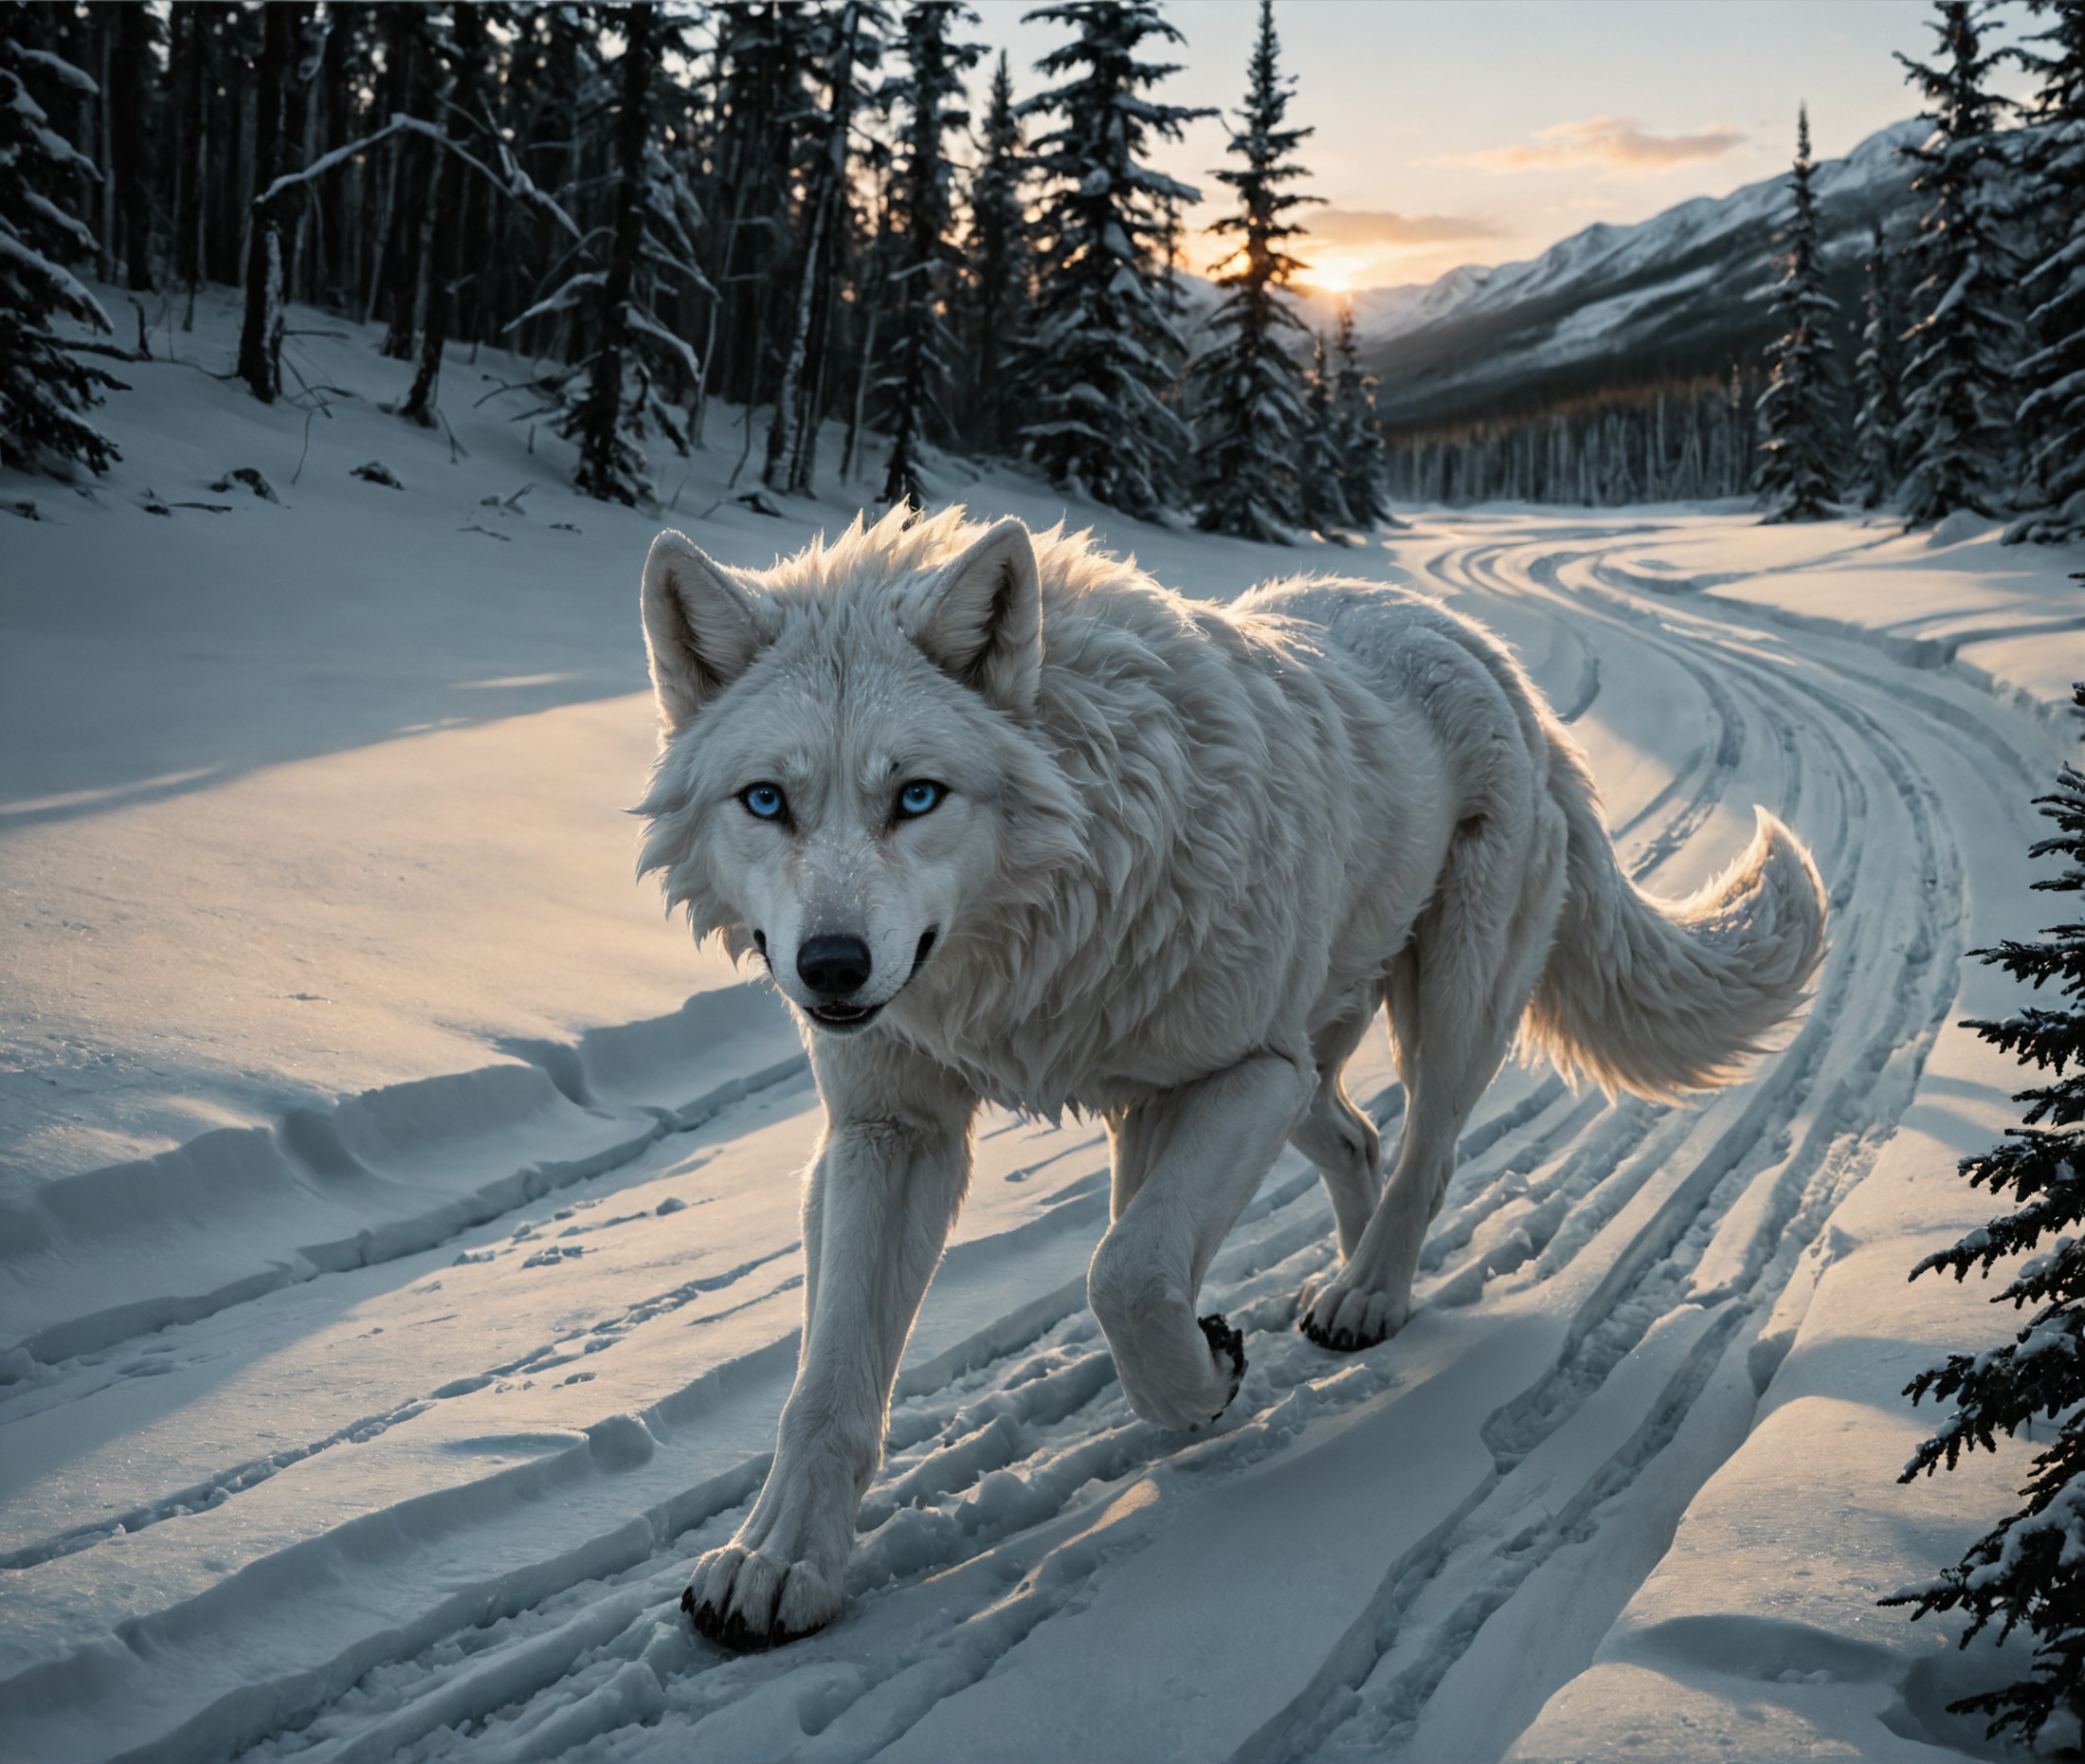 nature shot with wide shot an icy artic tundra,arctic-wolf running through a snowdrift,hunting,nightfall,dimly lit,intense...